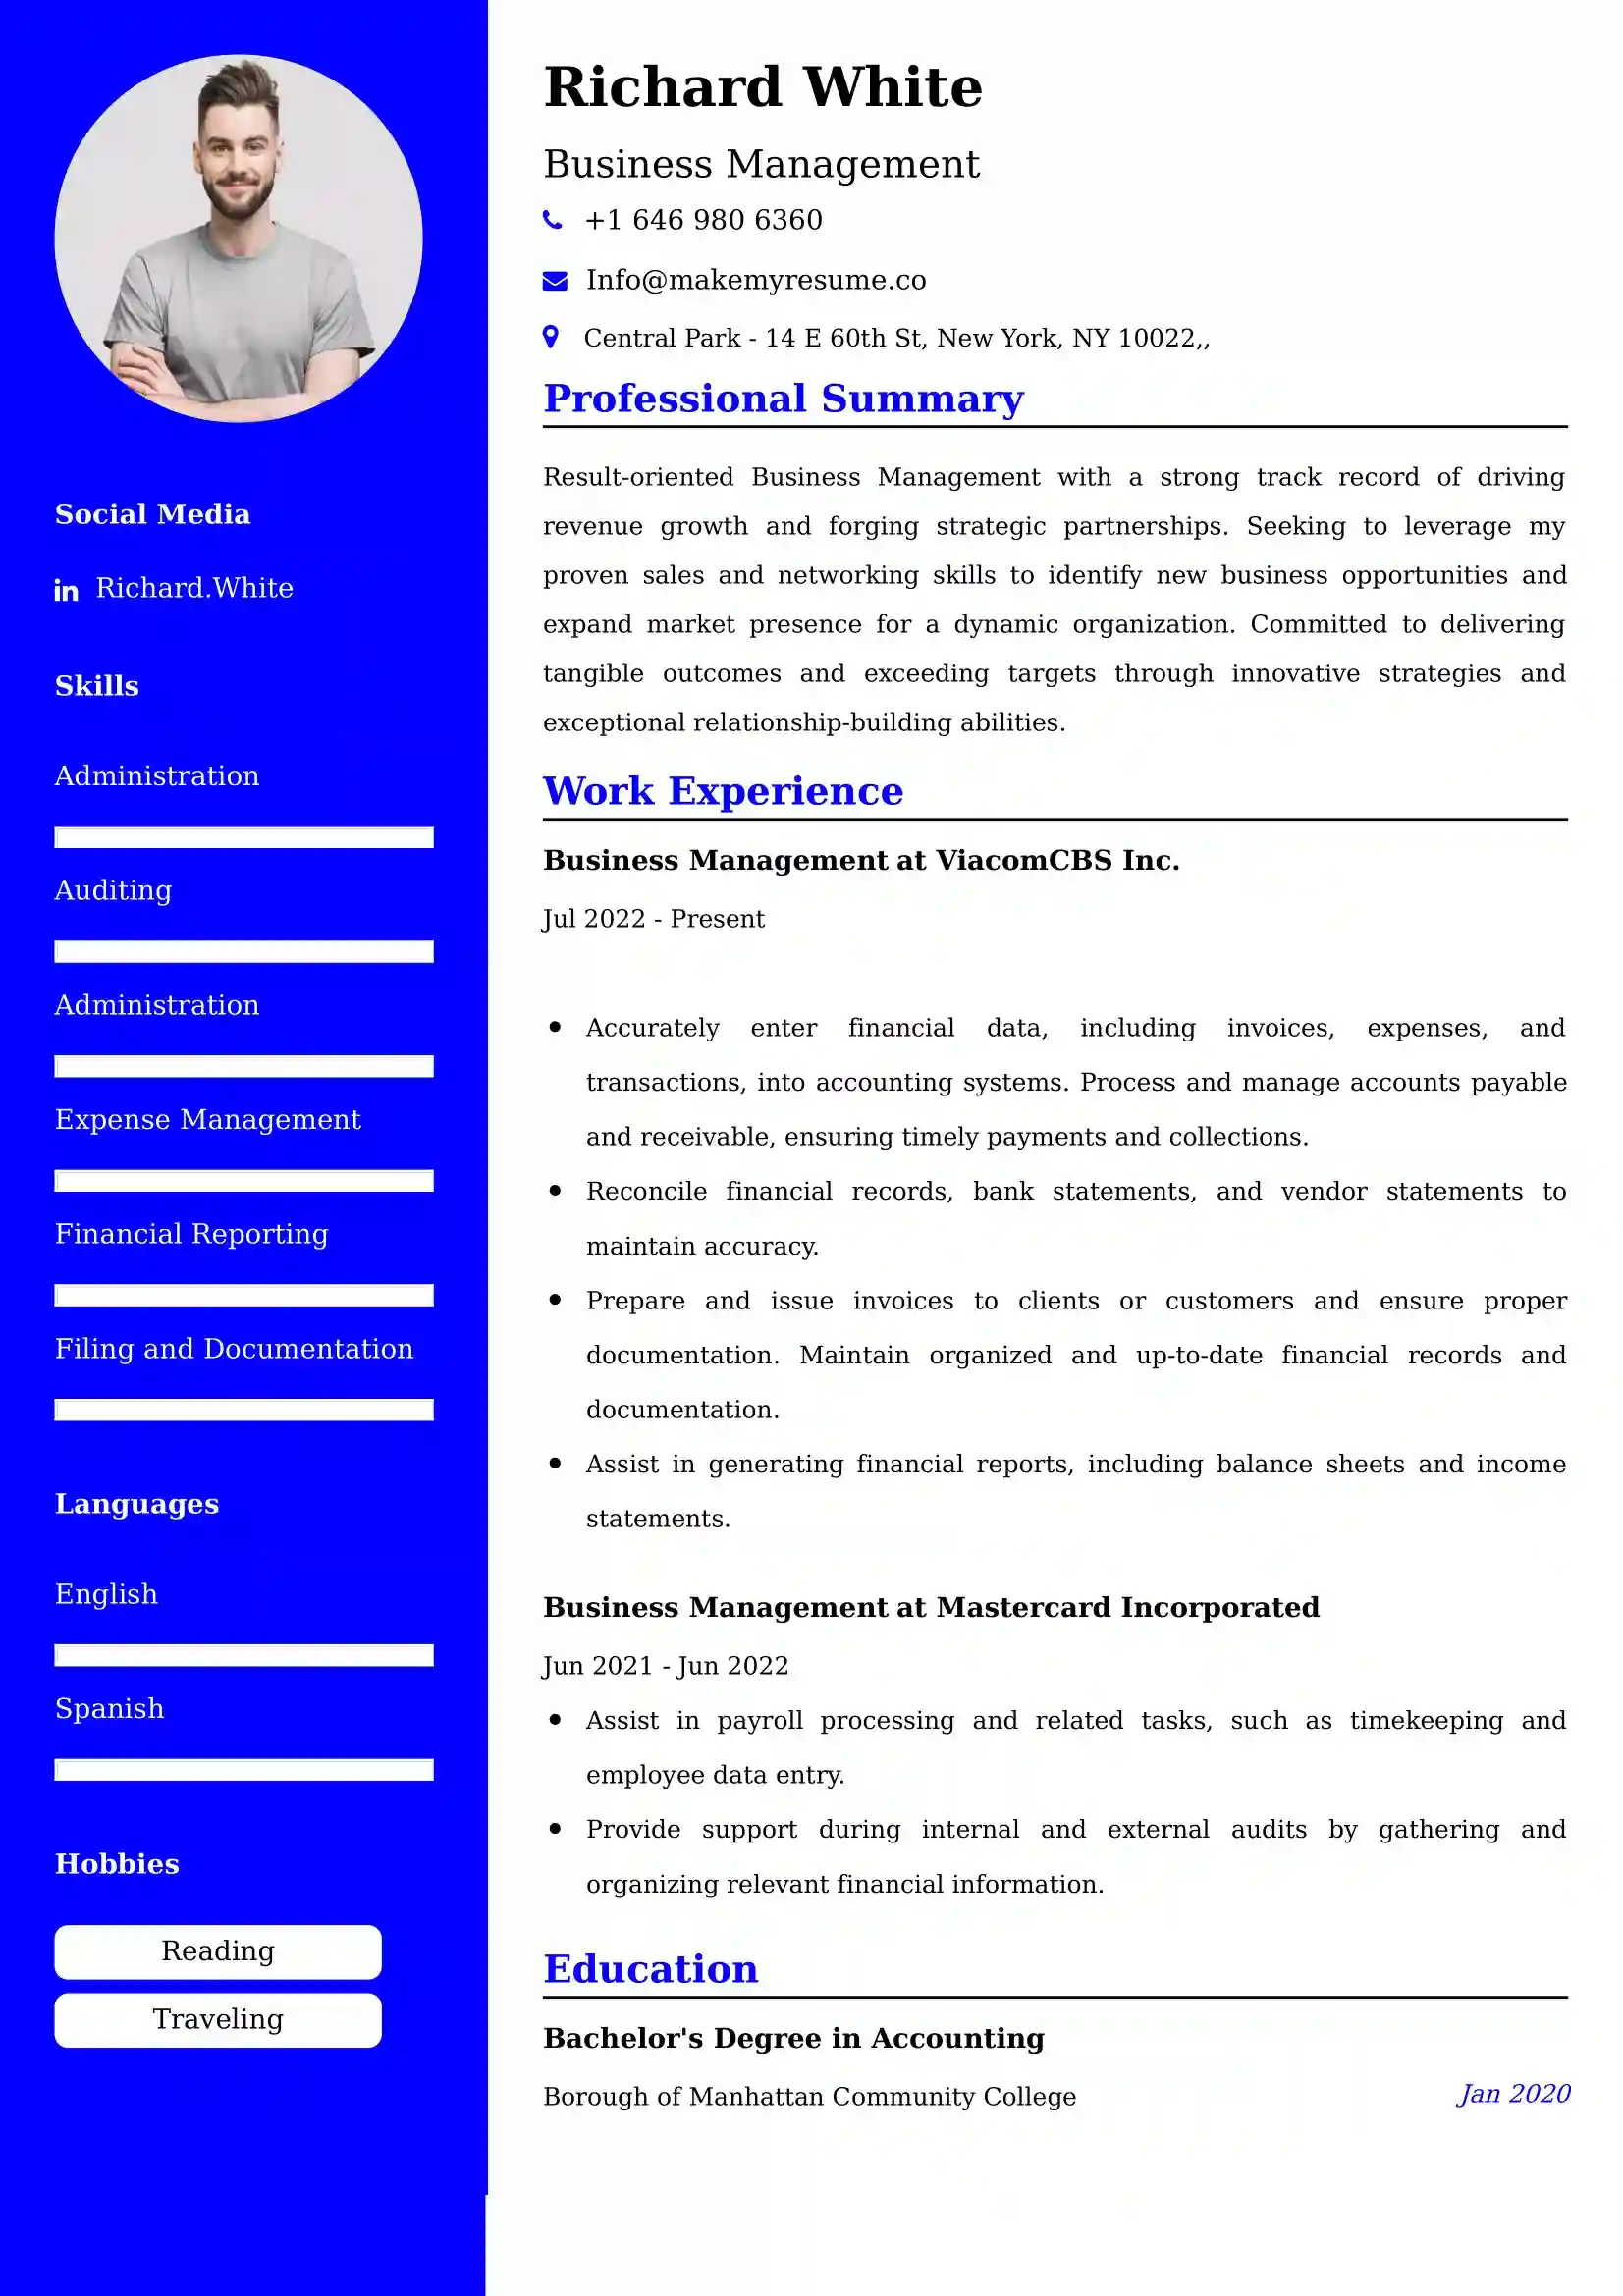 Business Management CV Examples - US Format